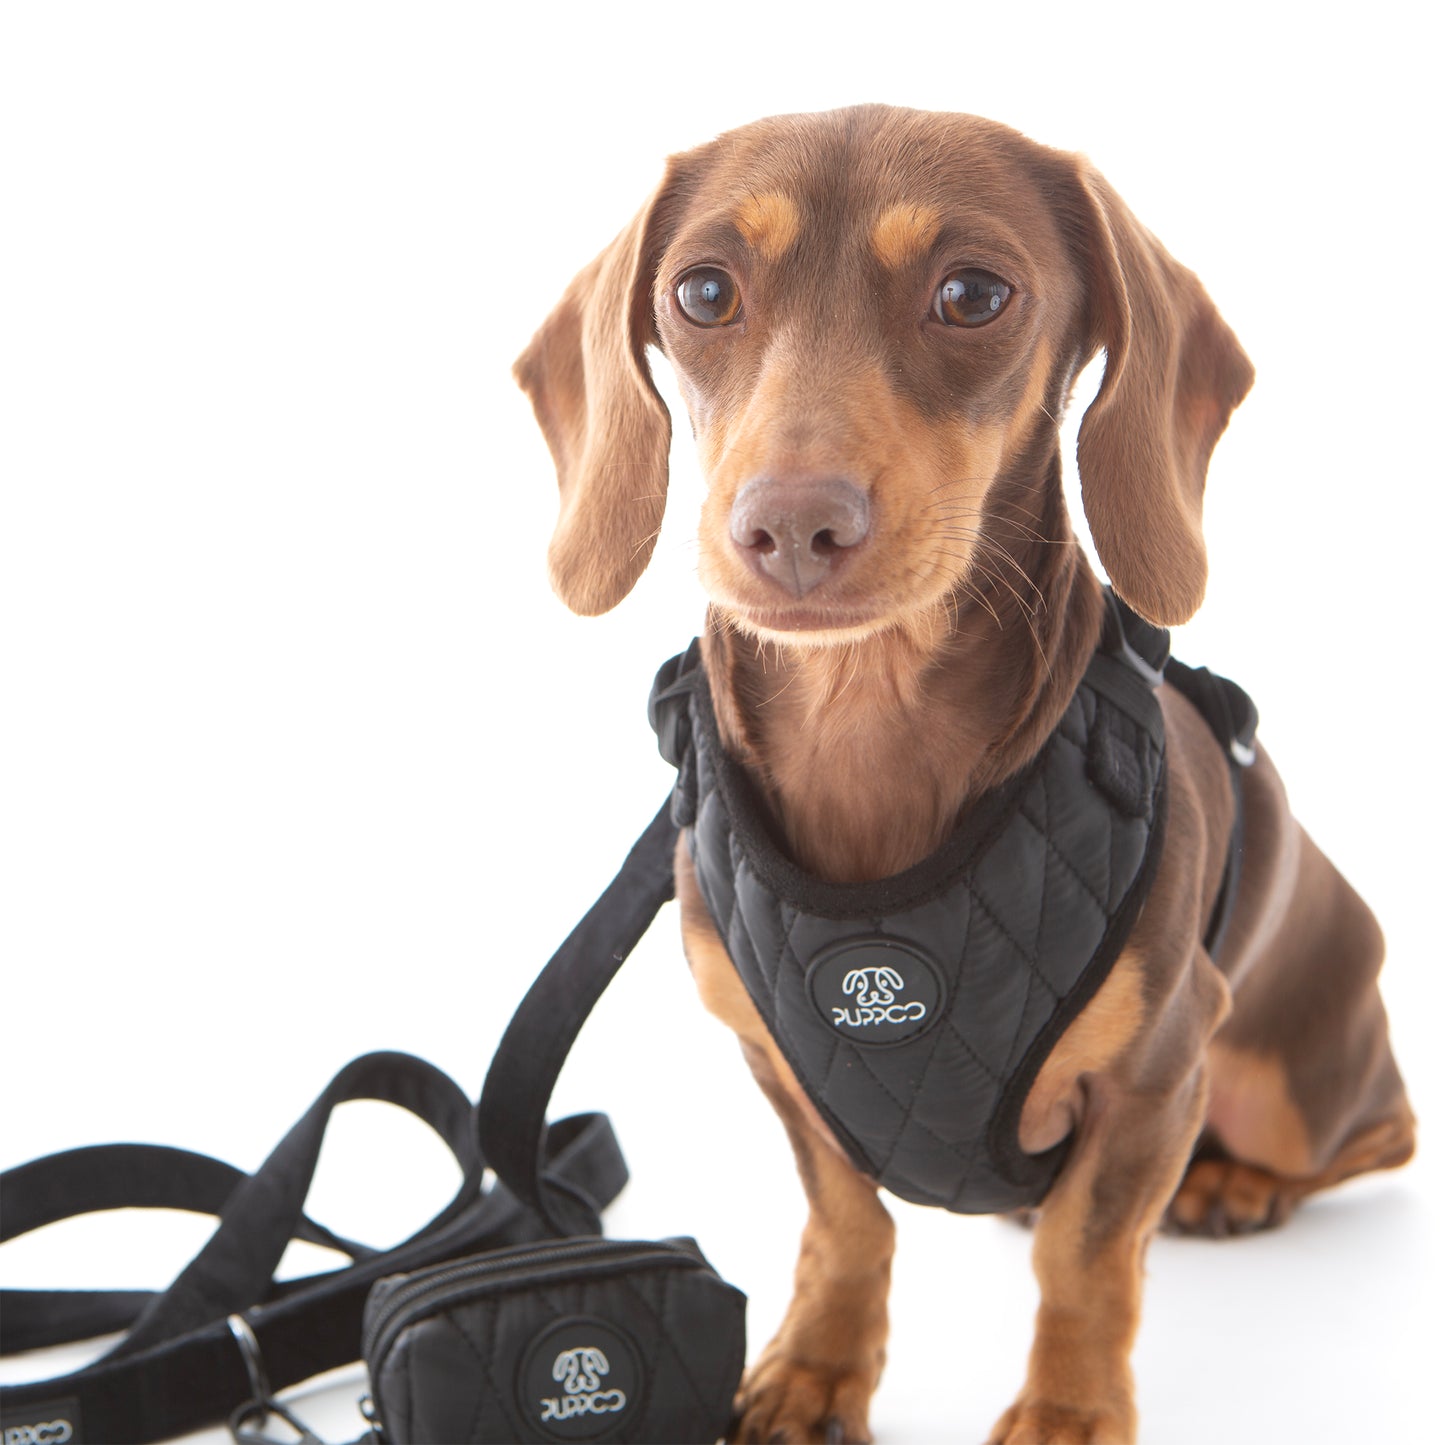 Pufferd Vest Dog Harness on mini dachshund with lead and poop bag